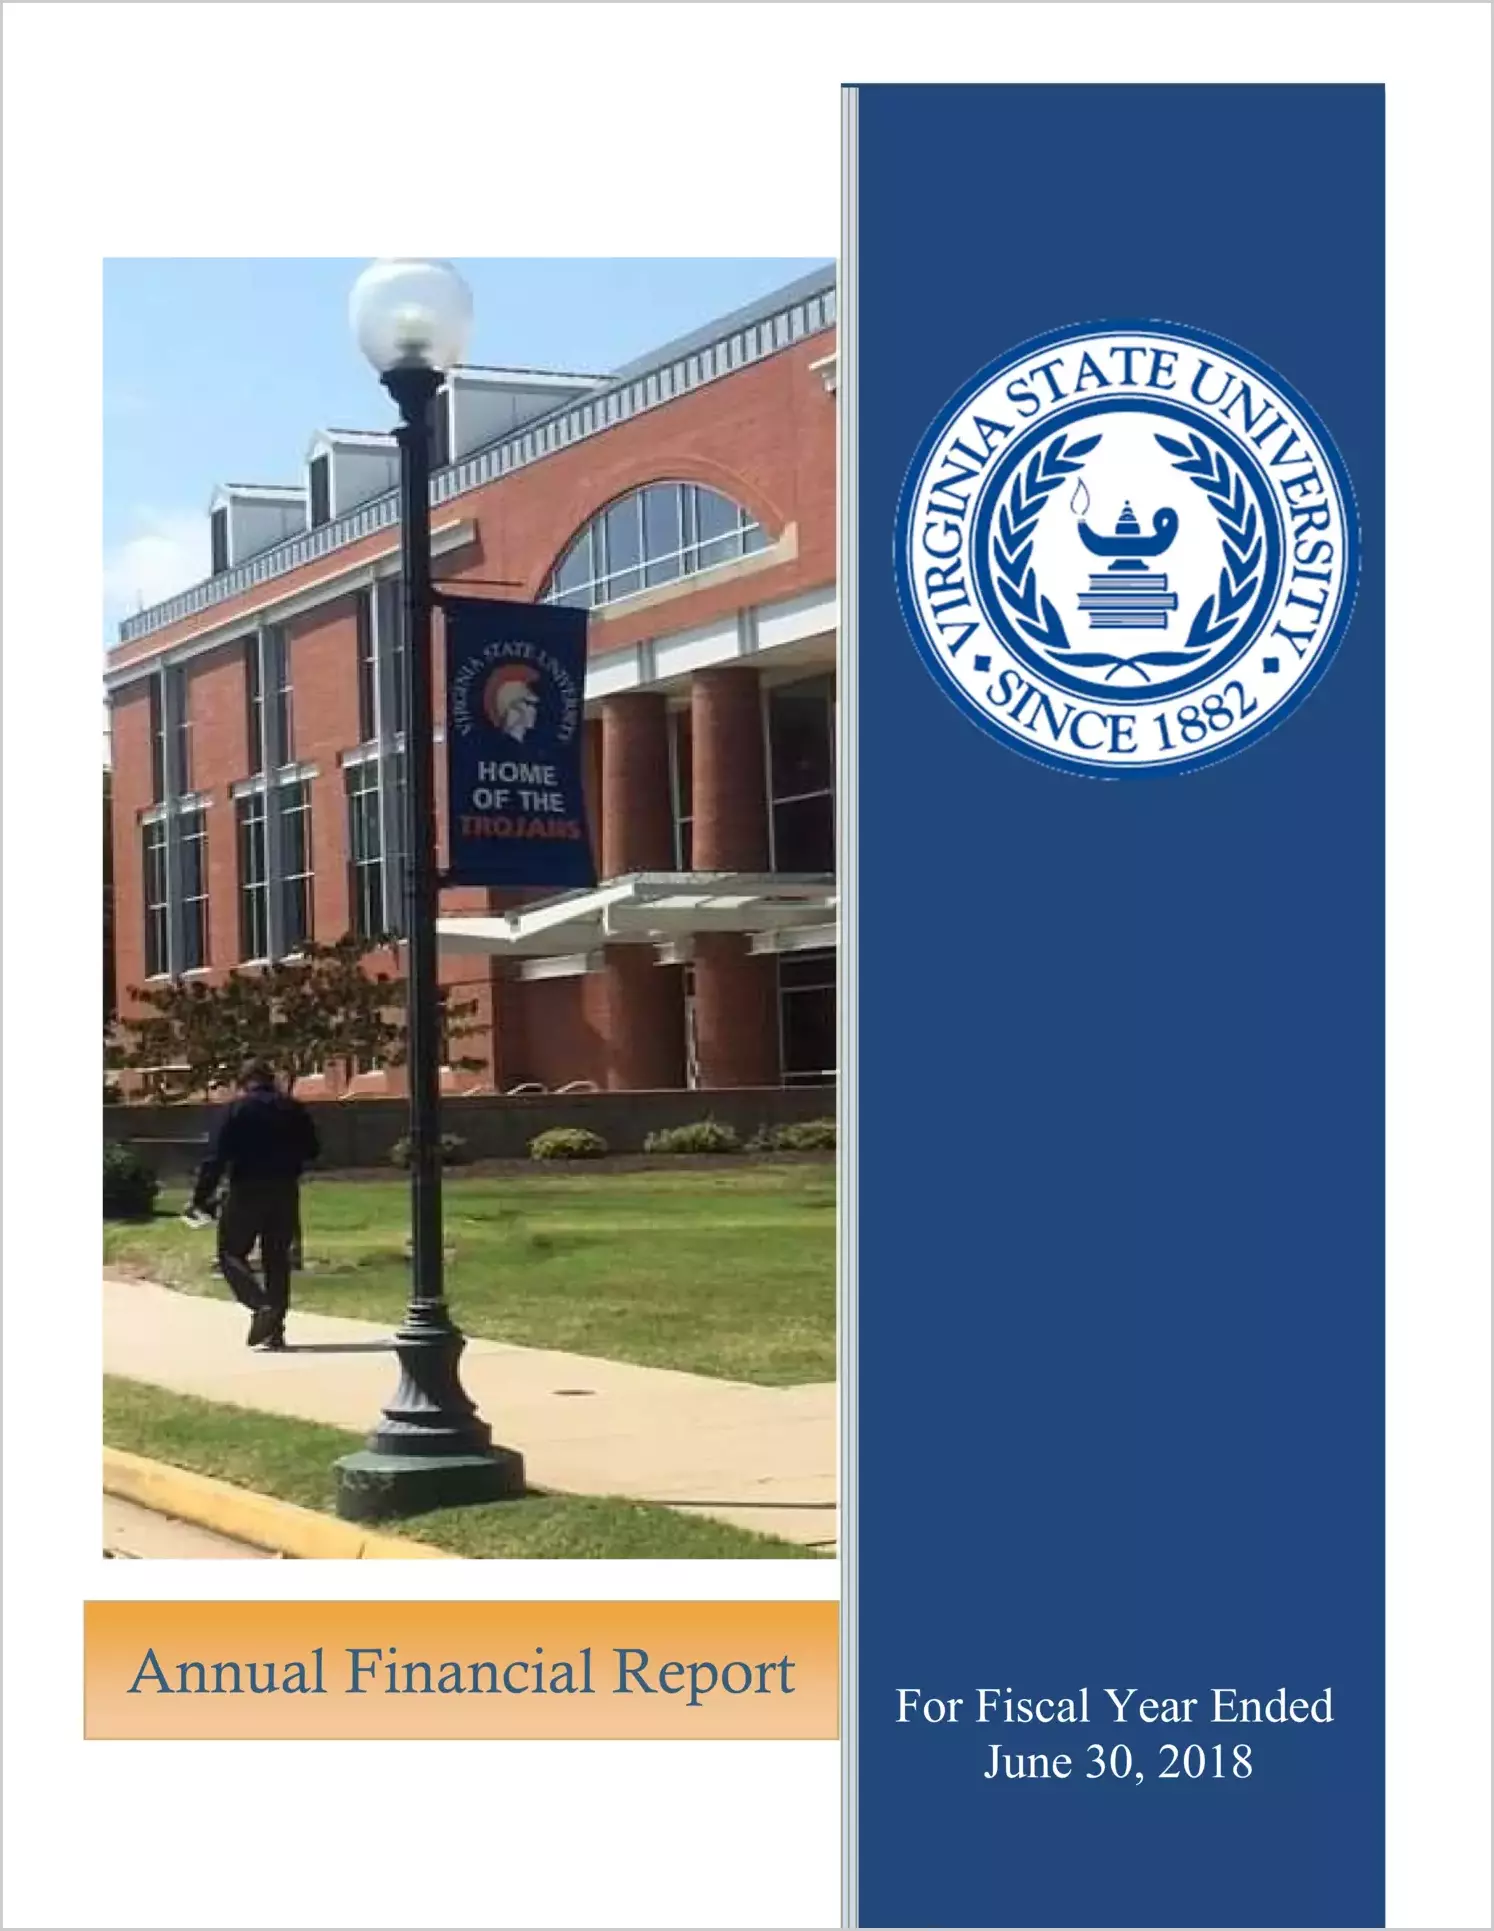 Virginia State University Financial Statements for the year ended June 30, 2018